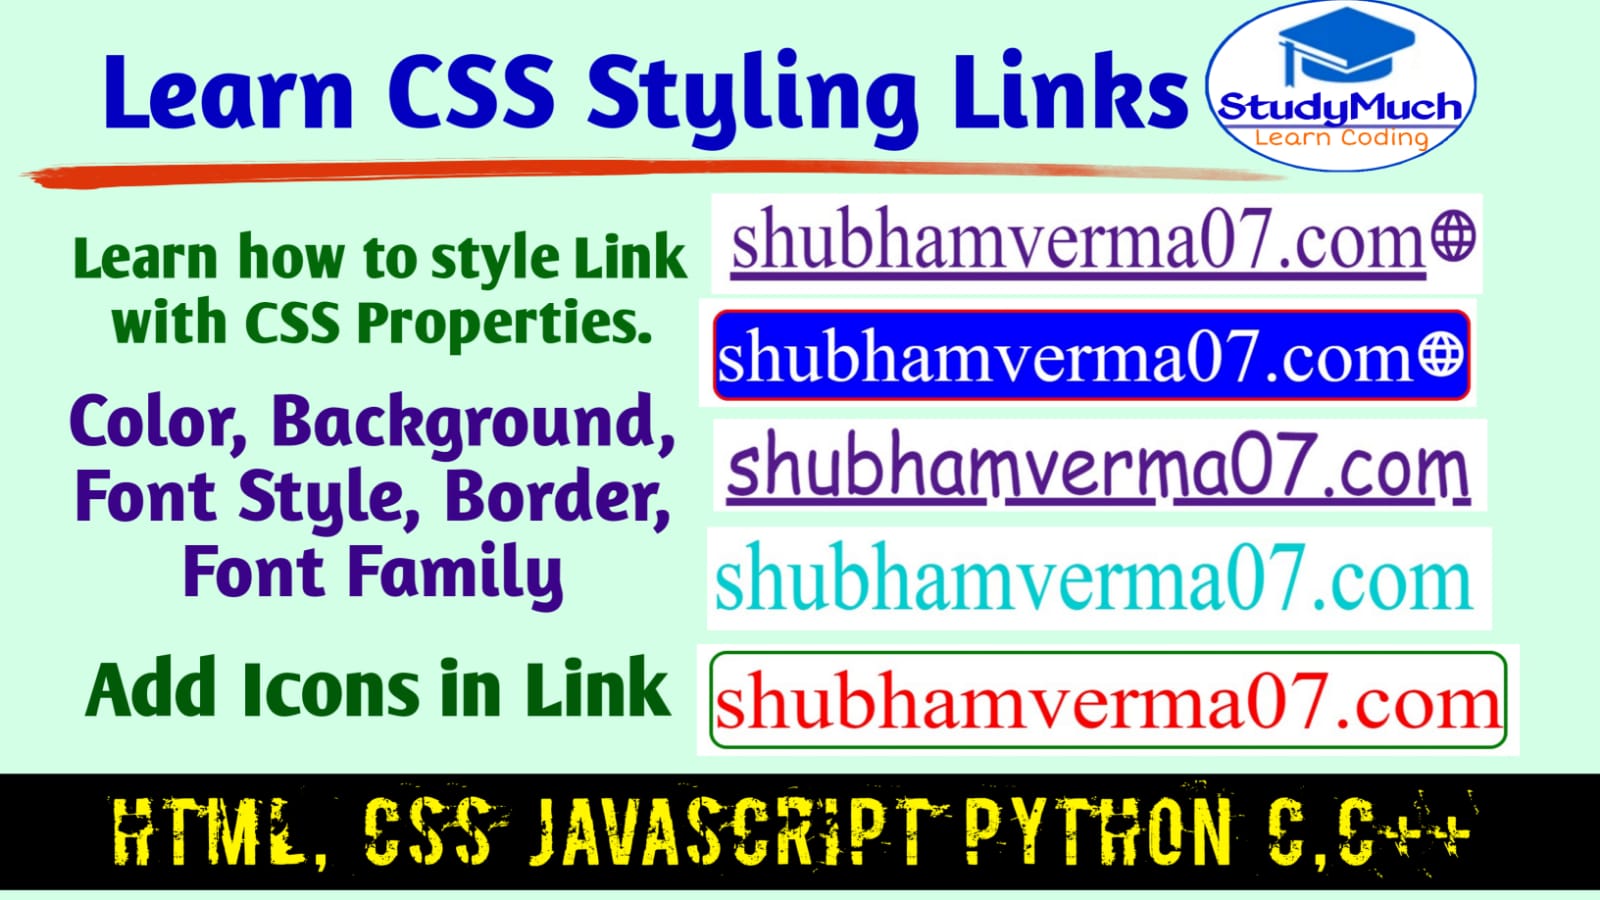 StudyMuch CSS Styling Links